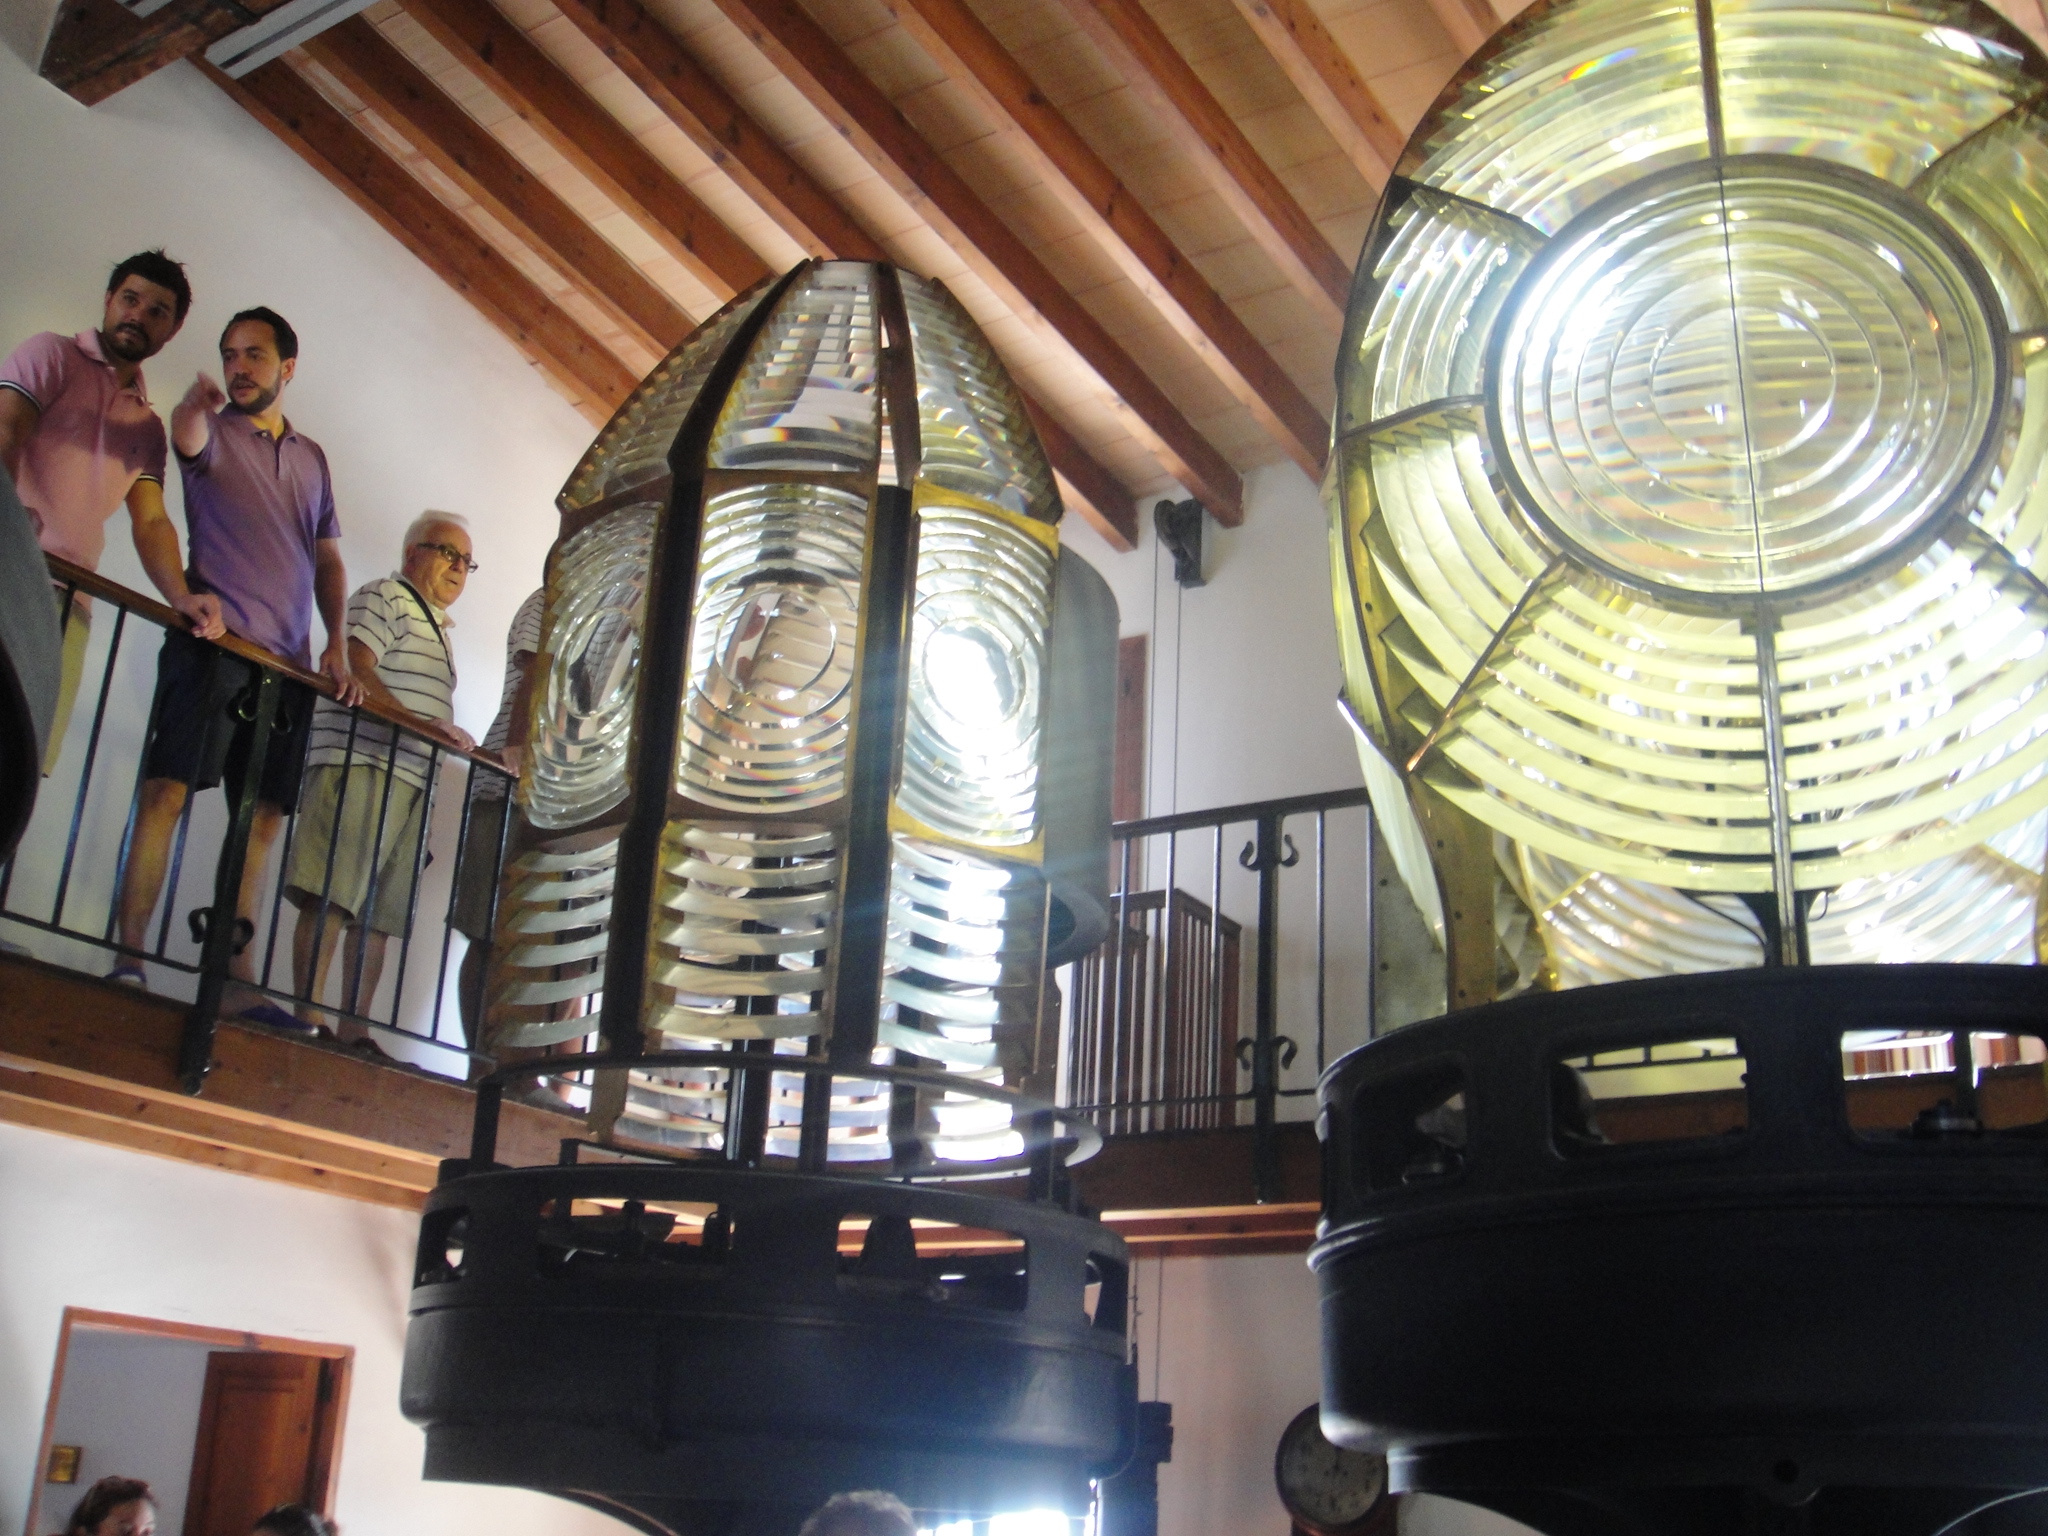 The Maritime Signalling Exhibition at the Portopí Lighthouse extends its weekend opening hours